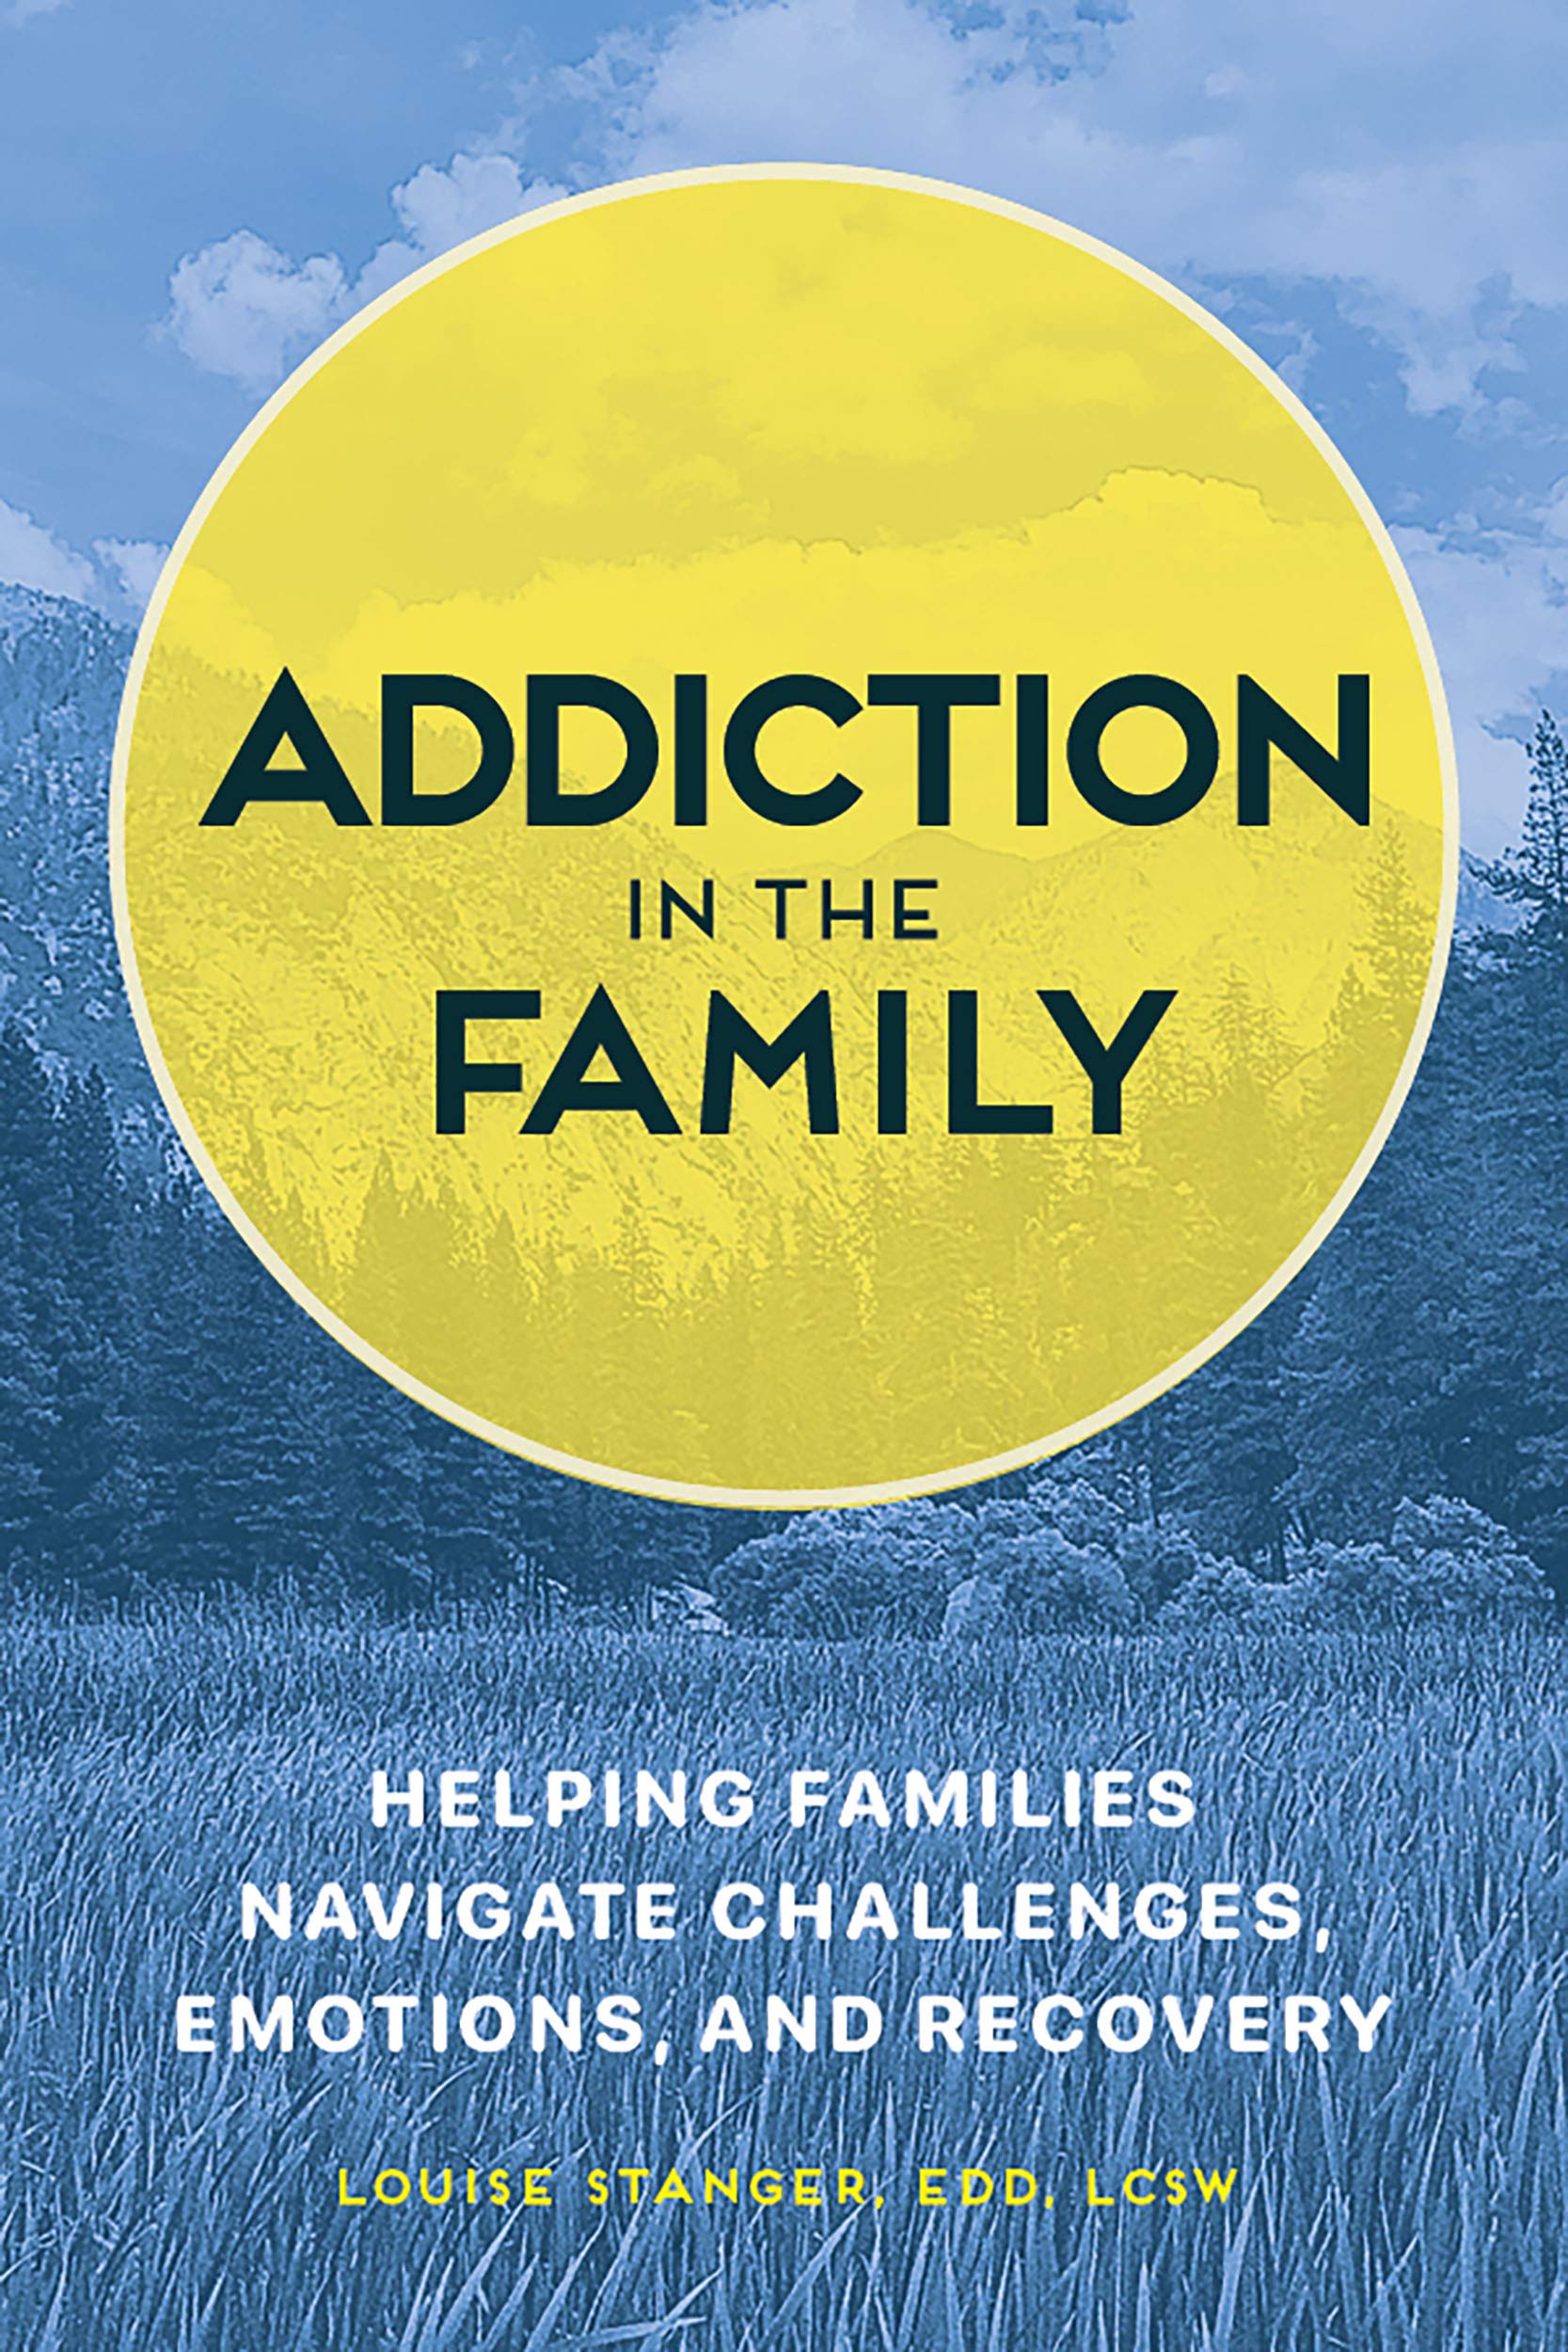 Addiction In The Family by Louise Stanger